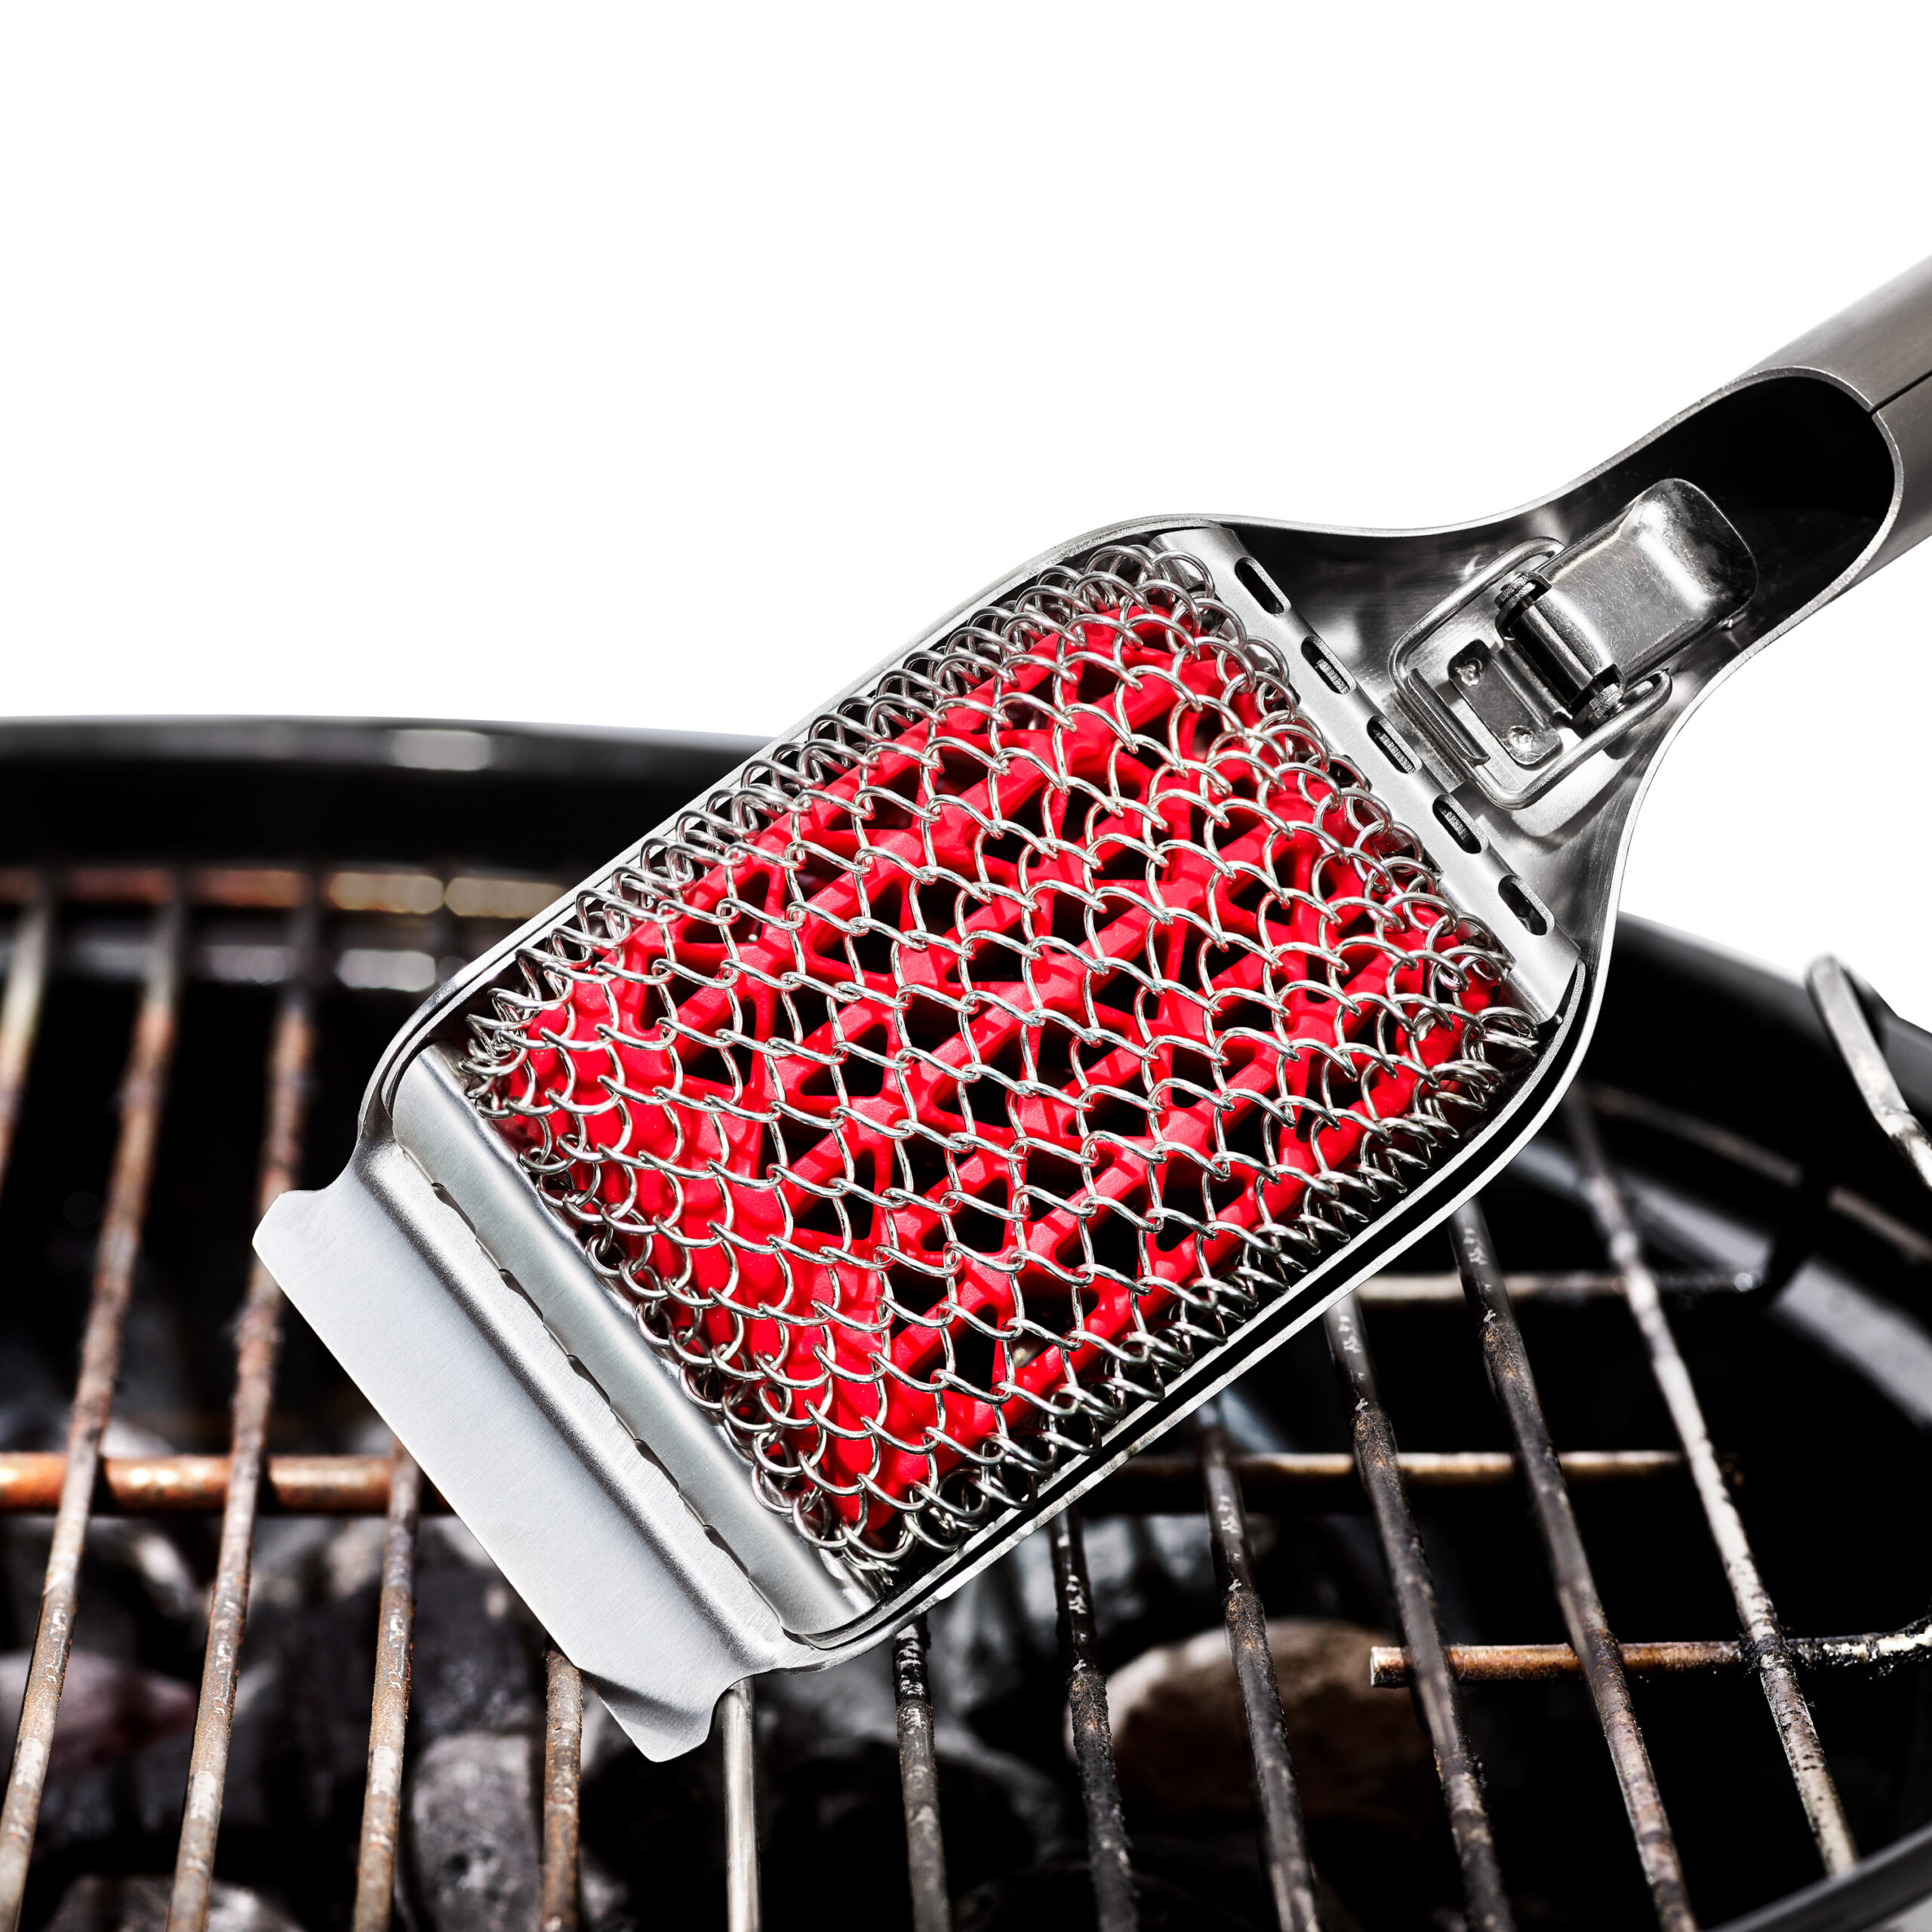 OXO Good Grips Electric Grill Pan And Panini Press Brush - Kitchen